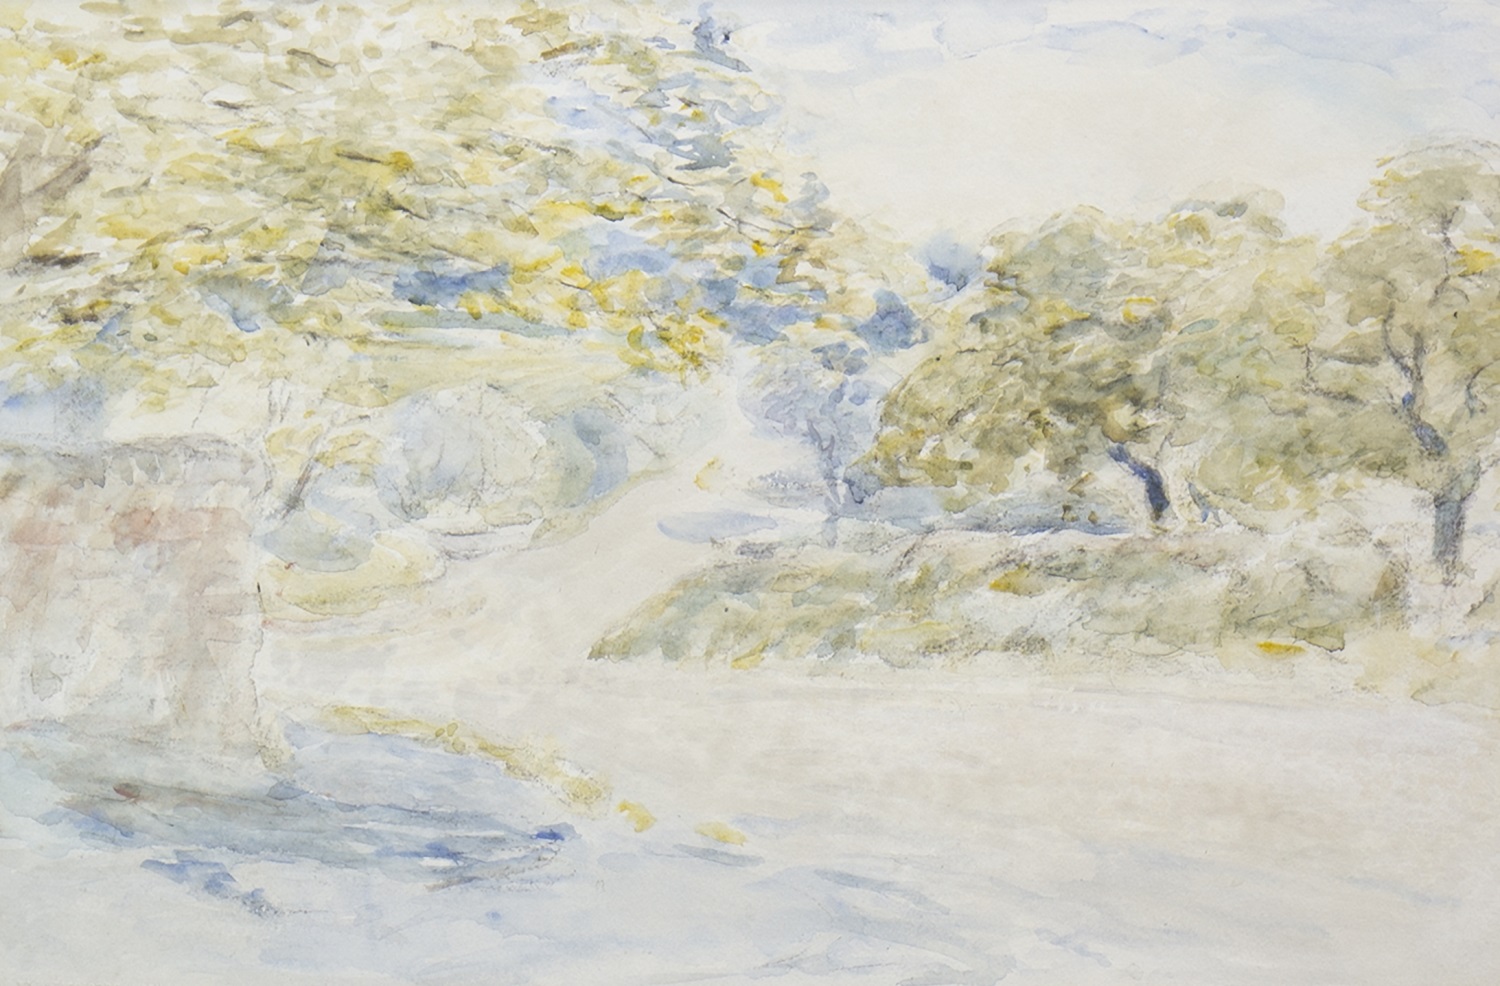 EARLY SUMMER, A WATERCOLOUR BY WILLIAM MCTAGGART